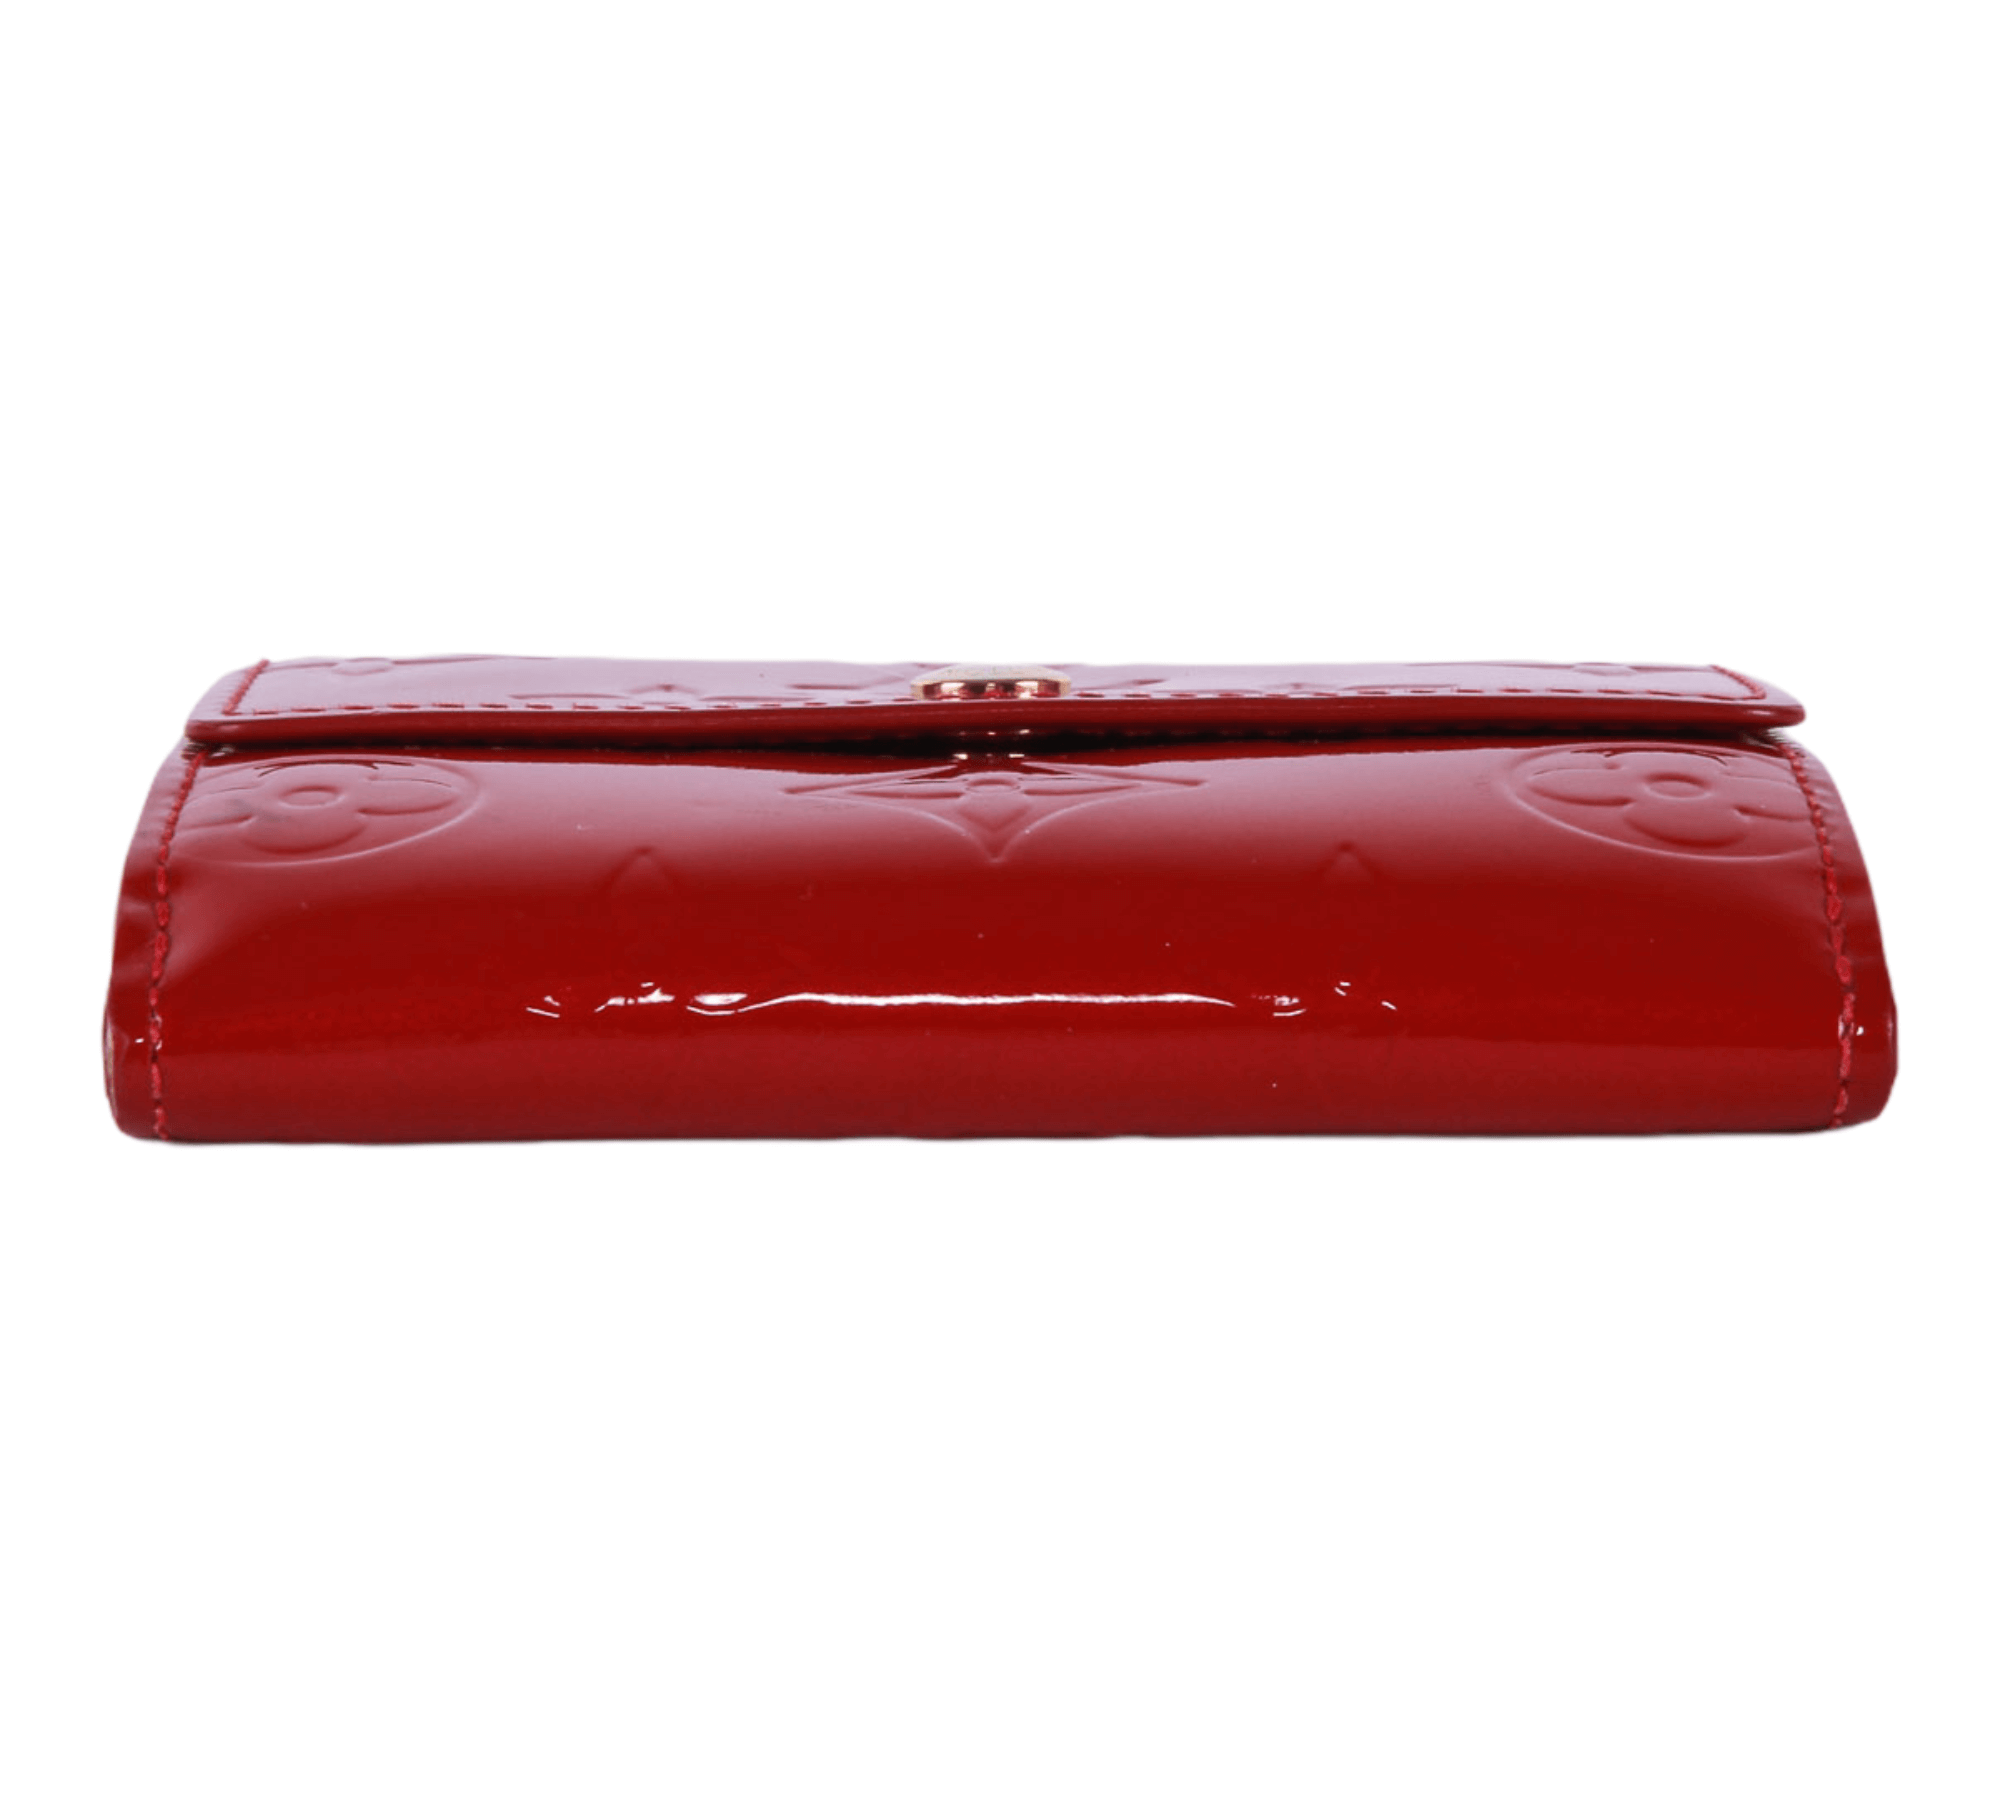 Louis Vuitton Vernis Red Pink Wallet Used (6206)